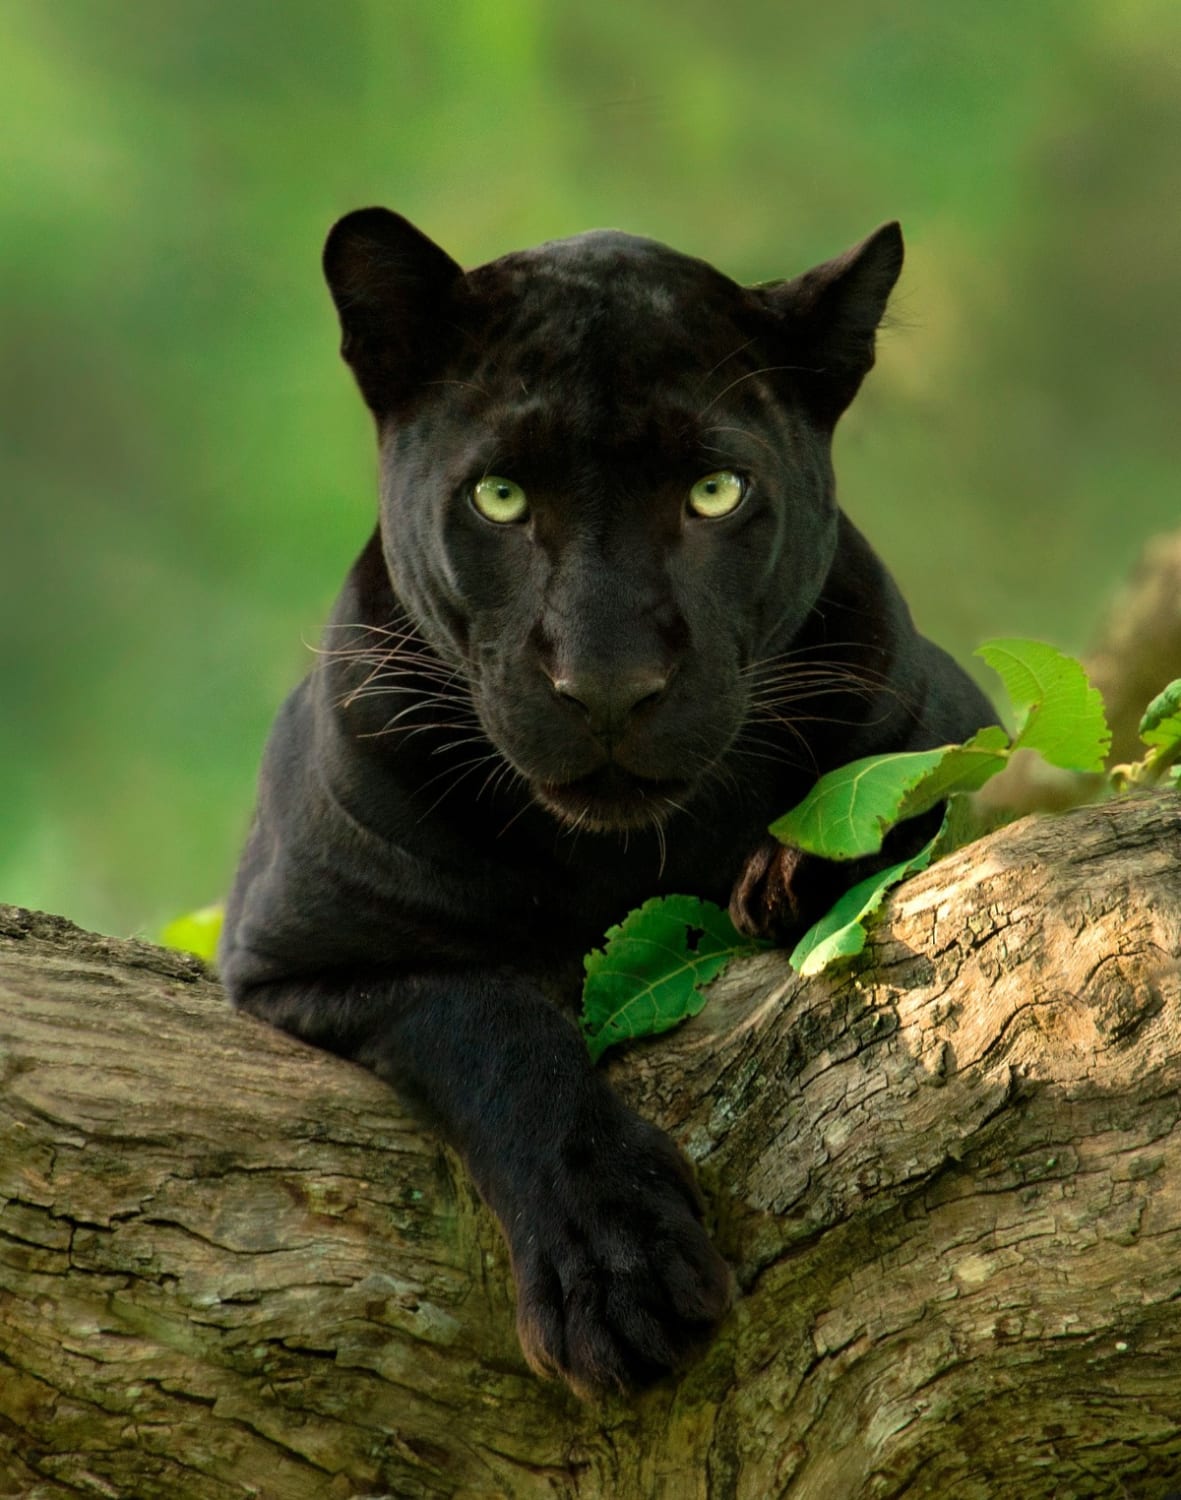 The stare of a black panther.